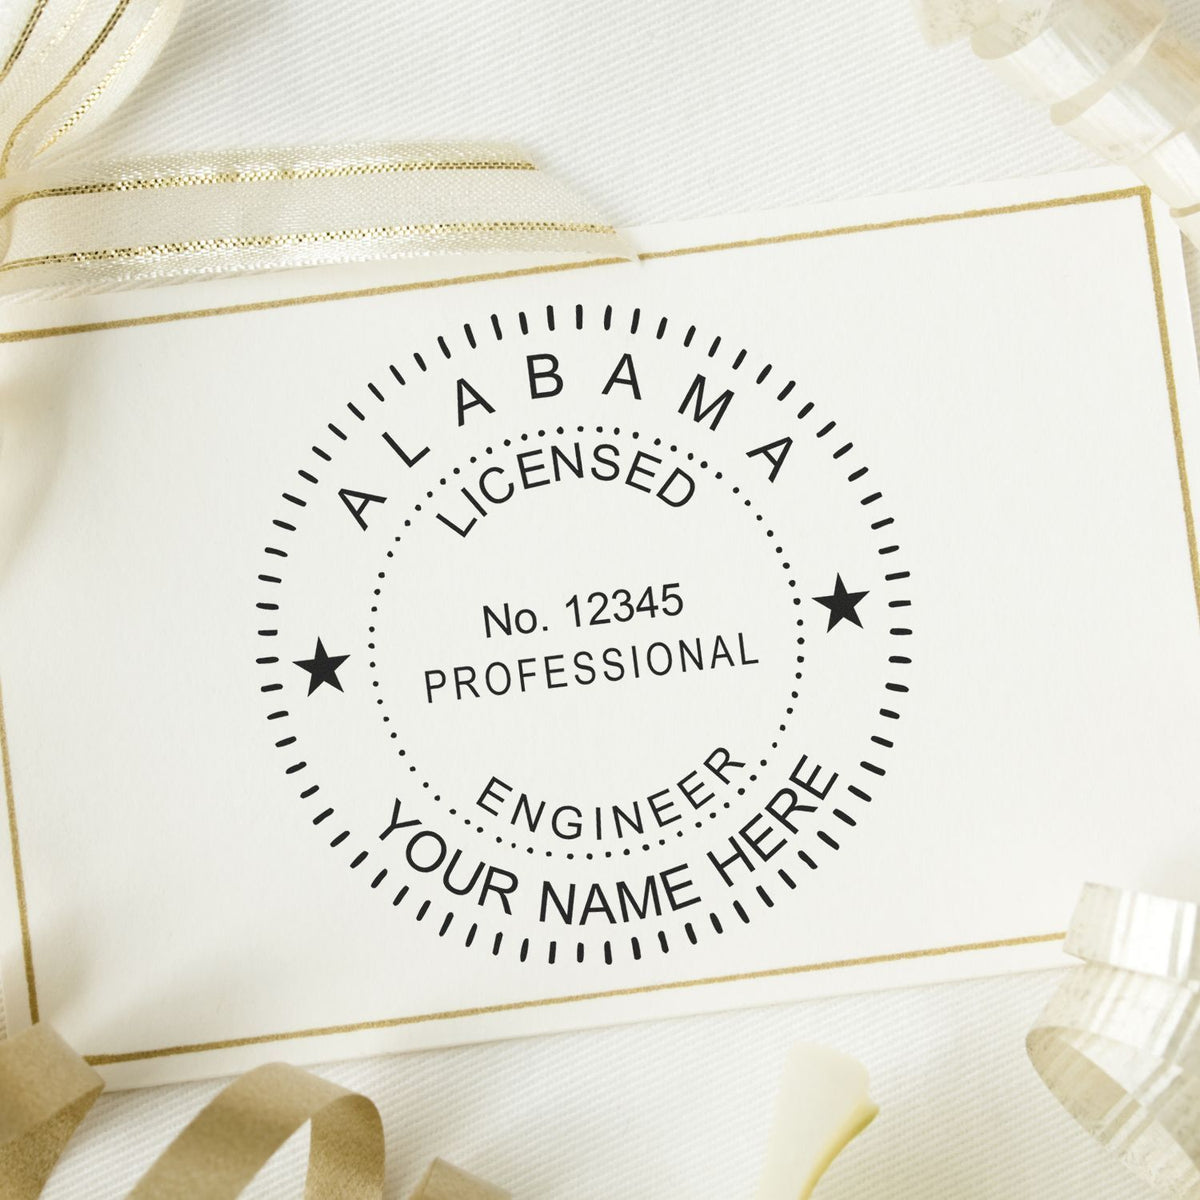 Another Example of a stamped impression of the Alabama Professional Engineer Seal Stamp on a piece of office paper.